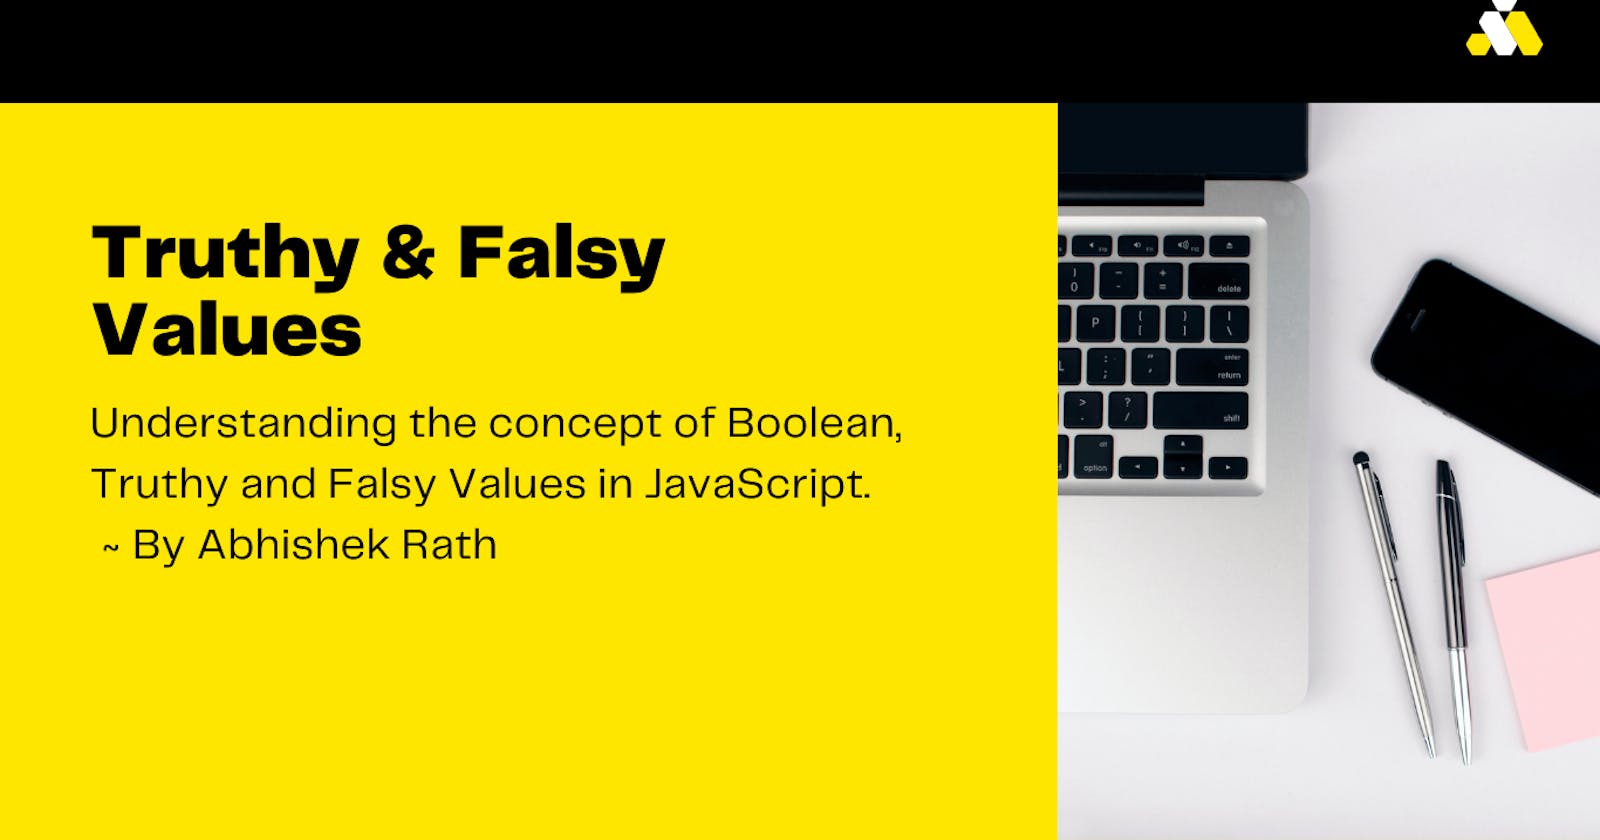 Truthy and Falsy Values in JavaScript